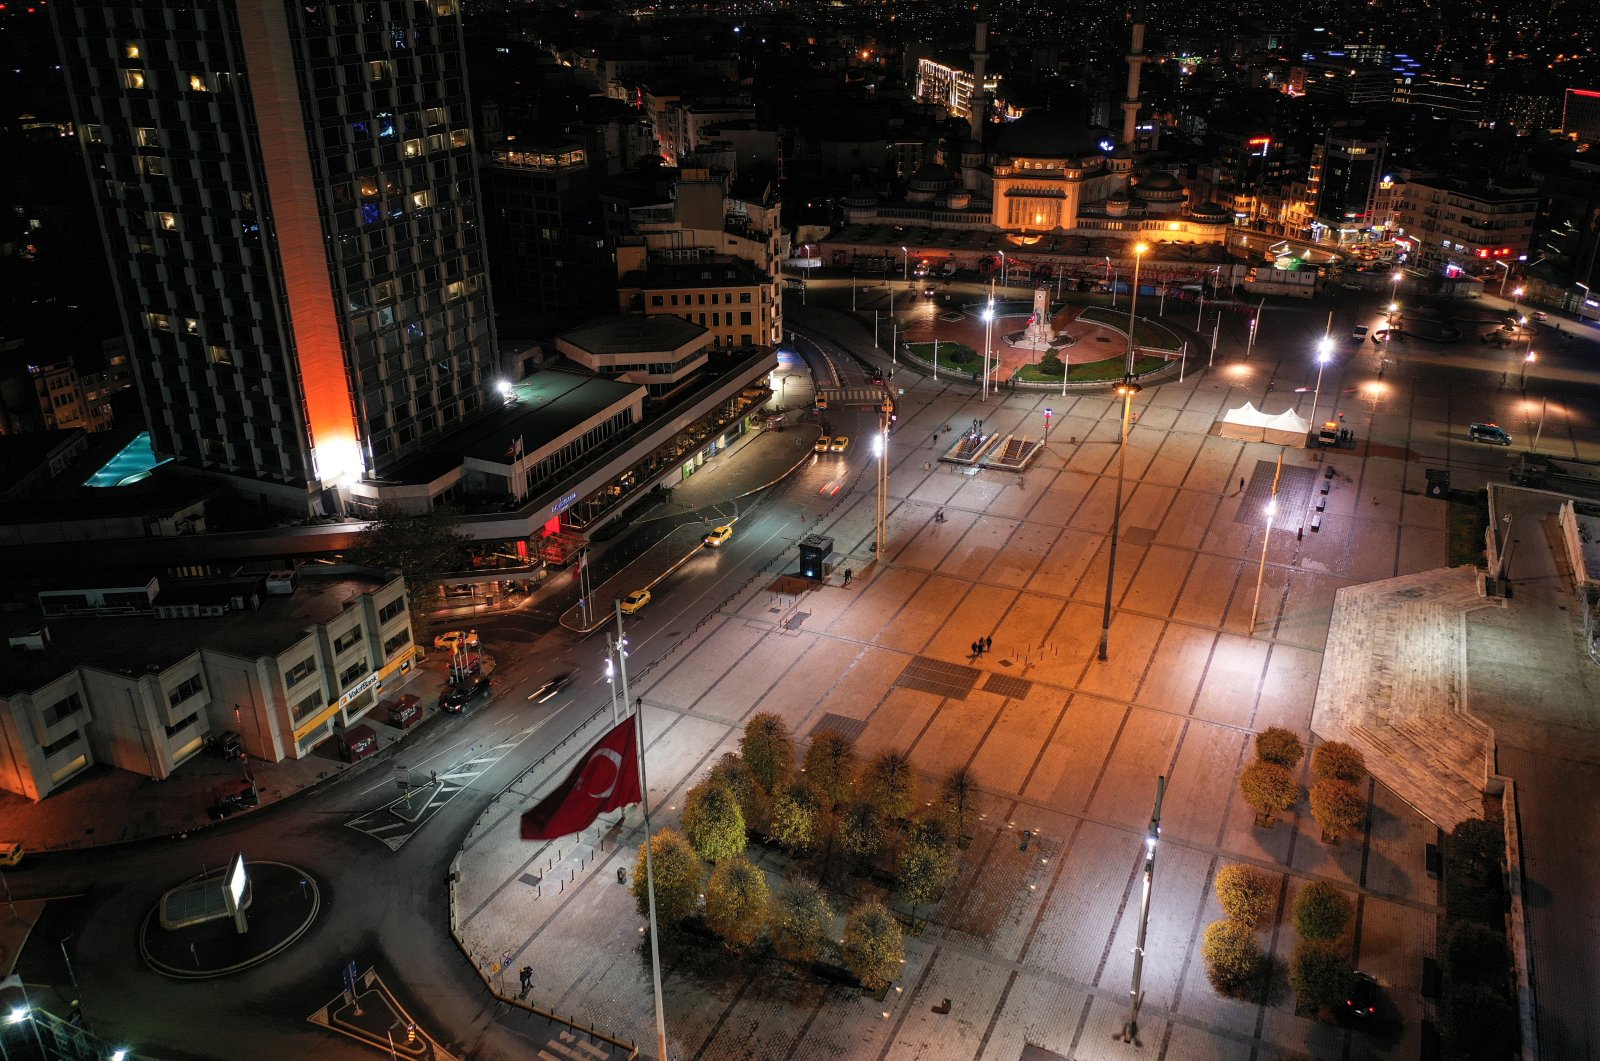 Drone footage of a deserted Taksim Square, a popular touristic neighborhood in Beyoğlu, Istanbul, during a nation-wide weekday curfew to combat the spread of COVID-19, Dec. 1, 2020. (Reuters Photo)